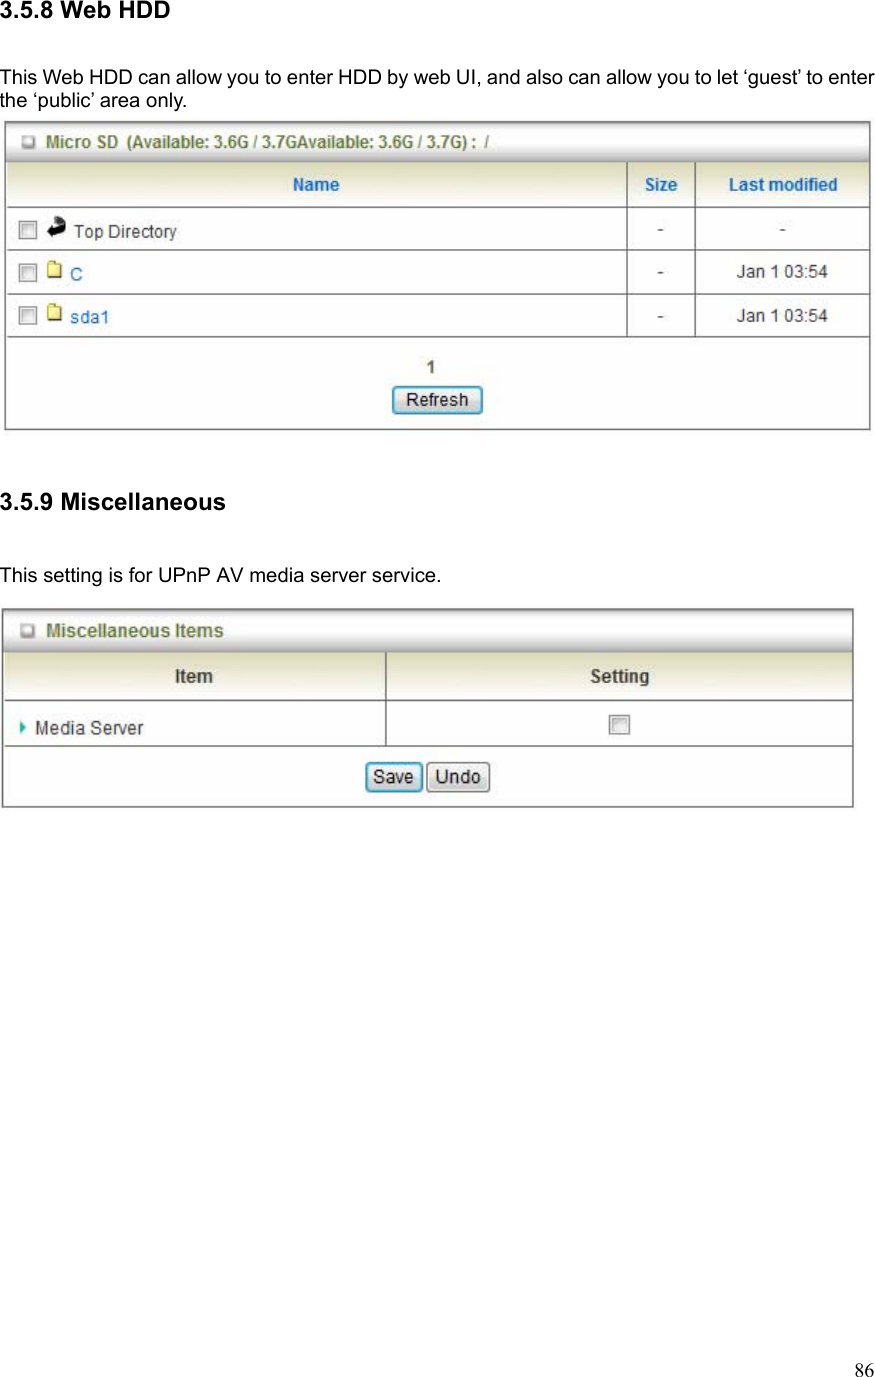  863.5.8 Web HDD  This Web HDD can allow you to enter HDD by web UI, and also can allow you to let ‘guest’ to enter the ‘public’ area only.   3.5.9 Miscellaneous  This setting is for UPnP AV media server service.              